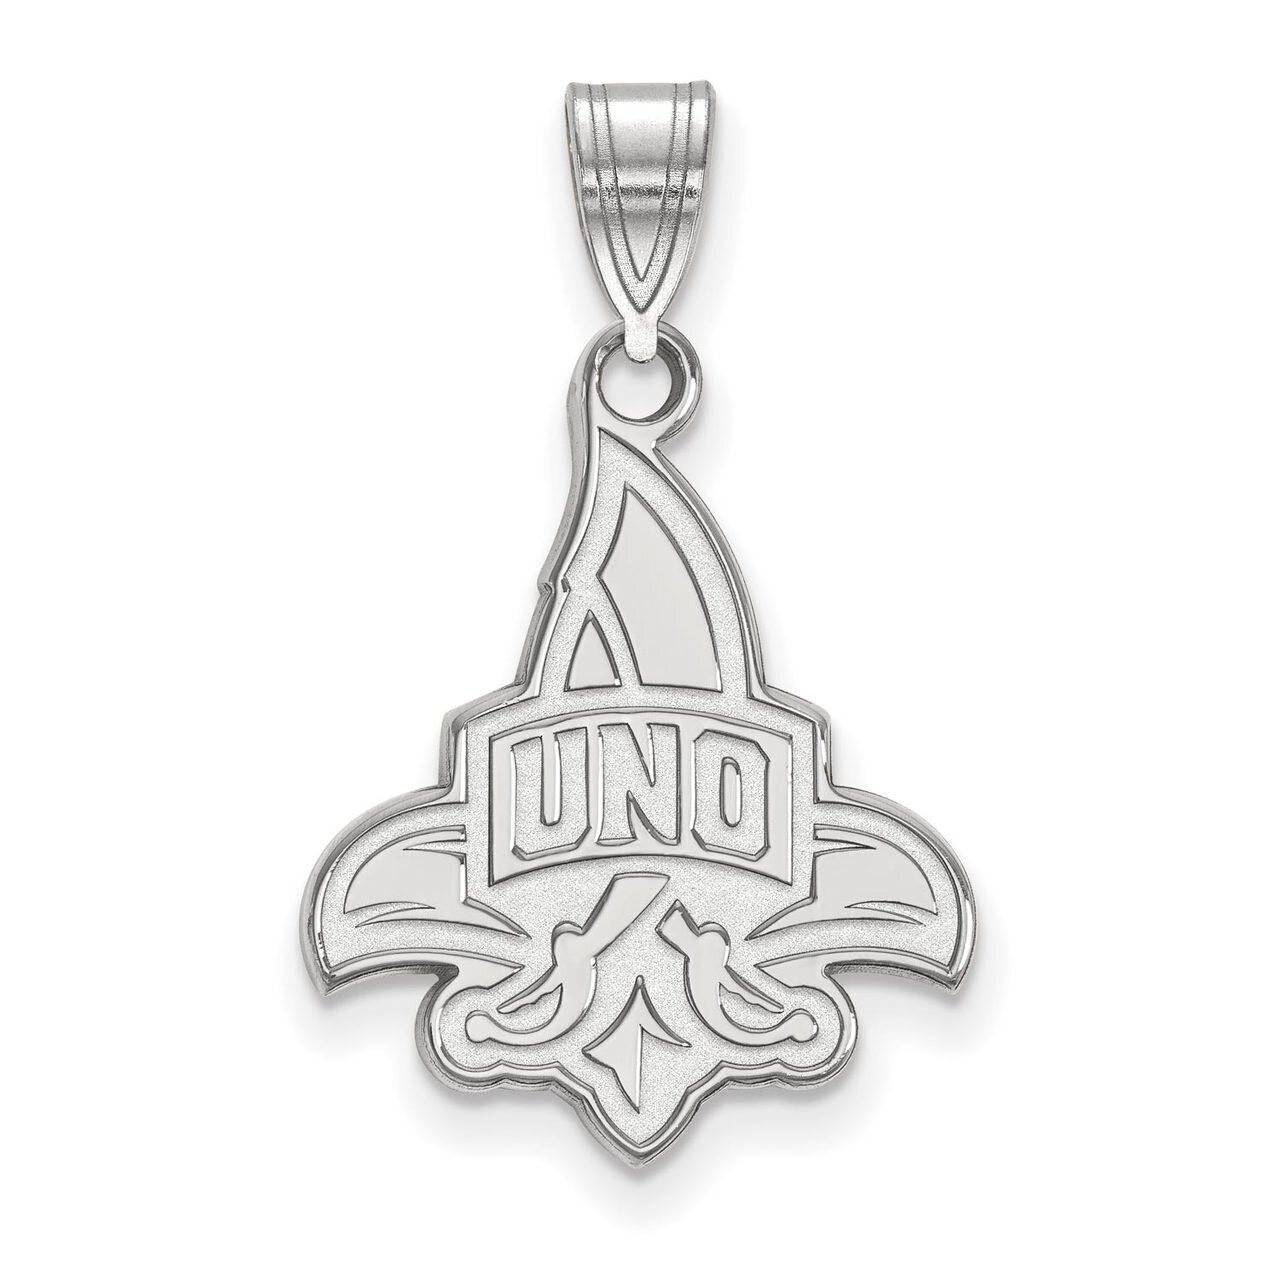 University of New Orleans Large Pendant Sterling Silver SS003UNO